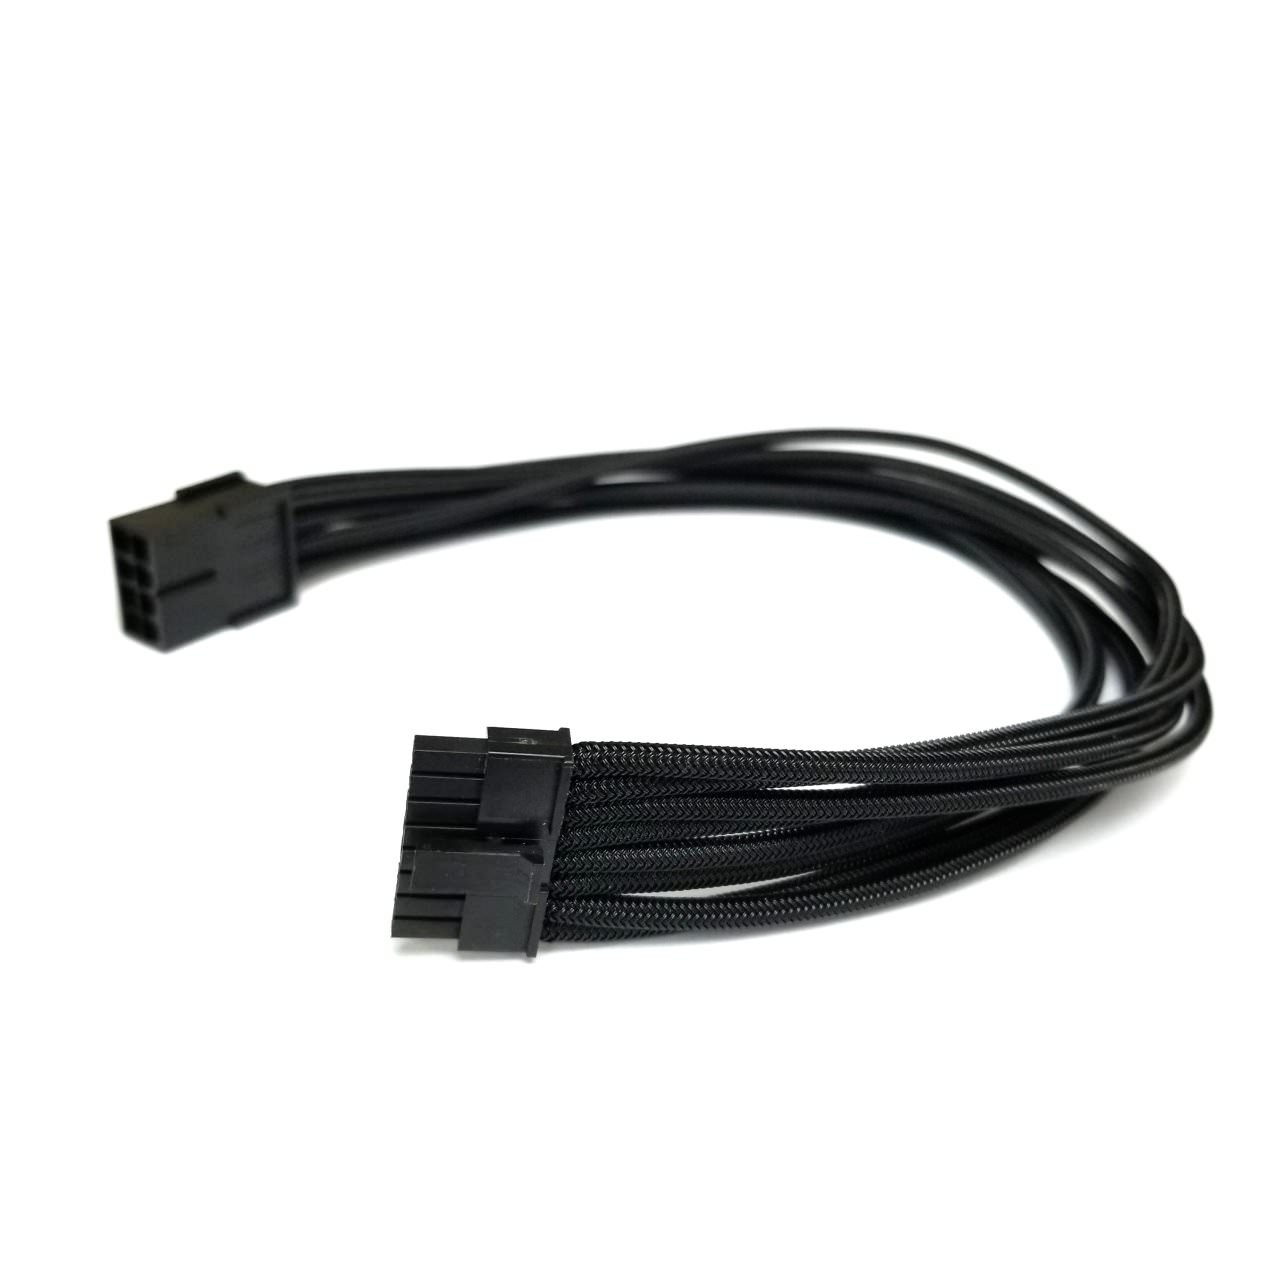 Premium Silicone Ultra Soft and Flexible Cable Kit for ITX SFF Builds -  MODDIY